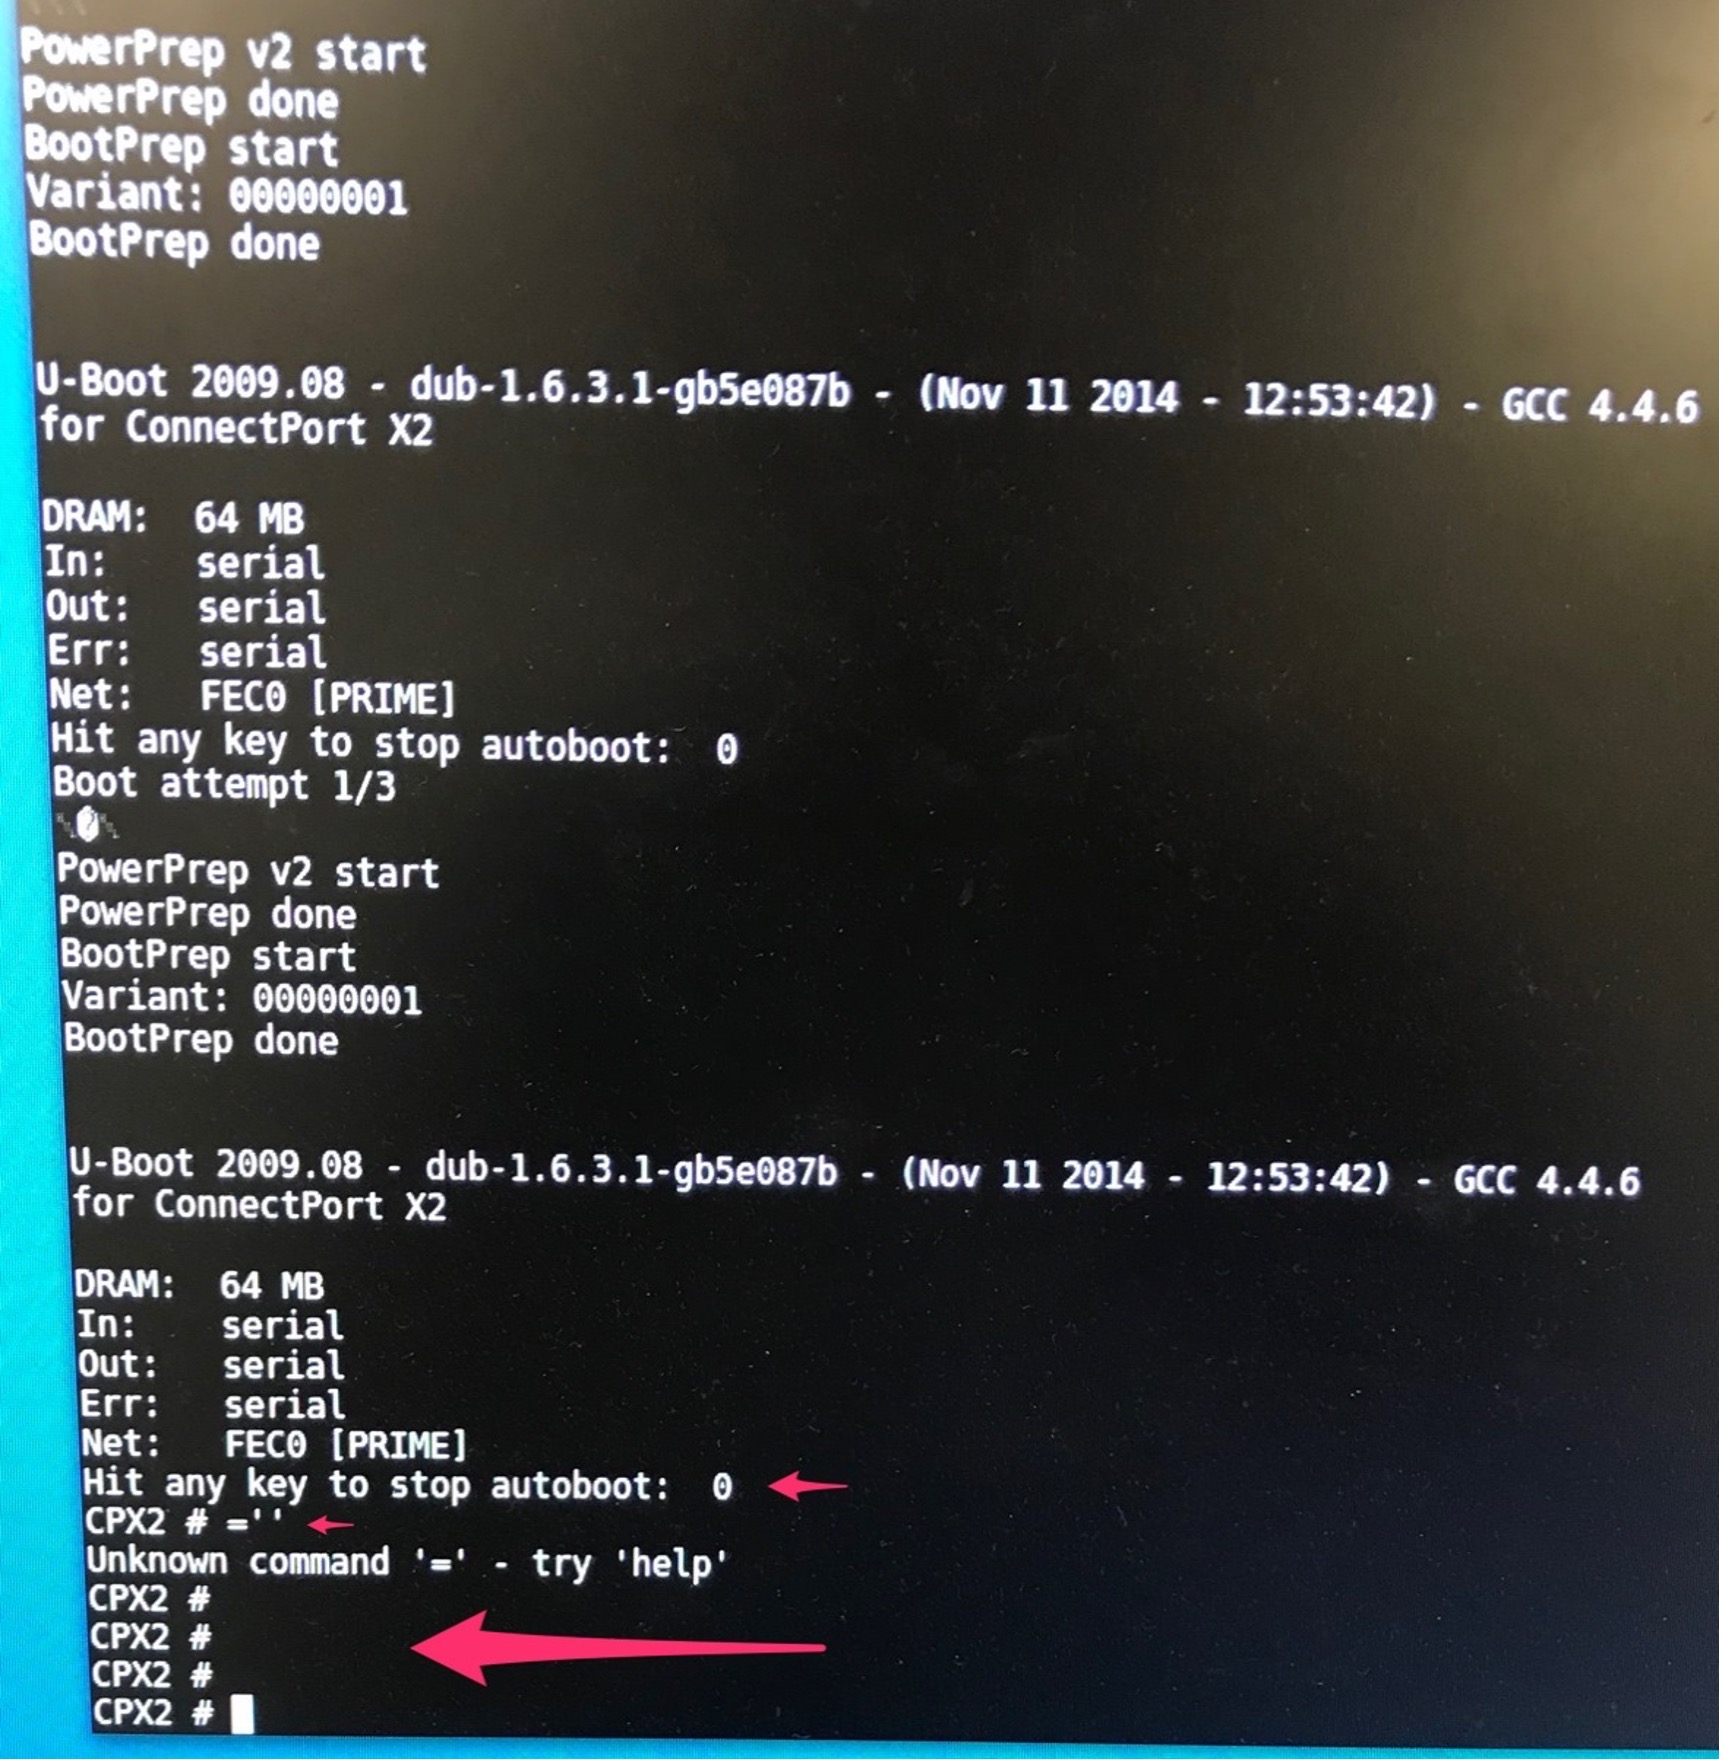 Access to U-Boot bootloader shell